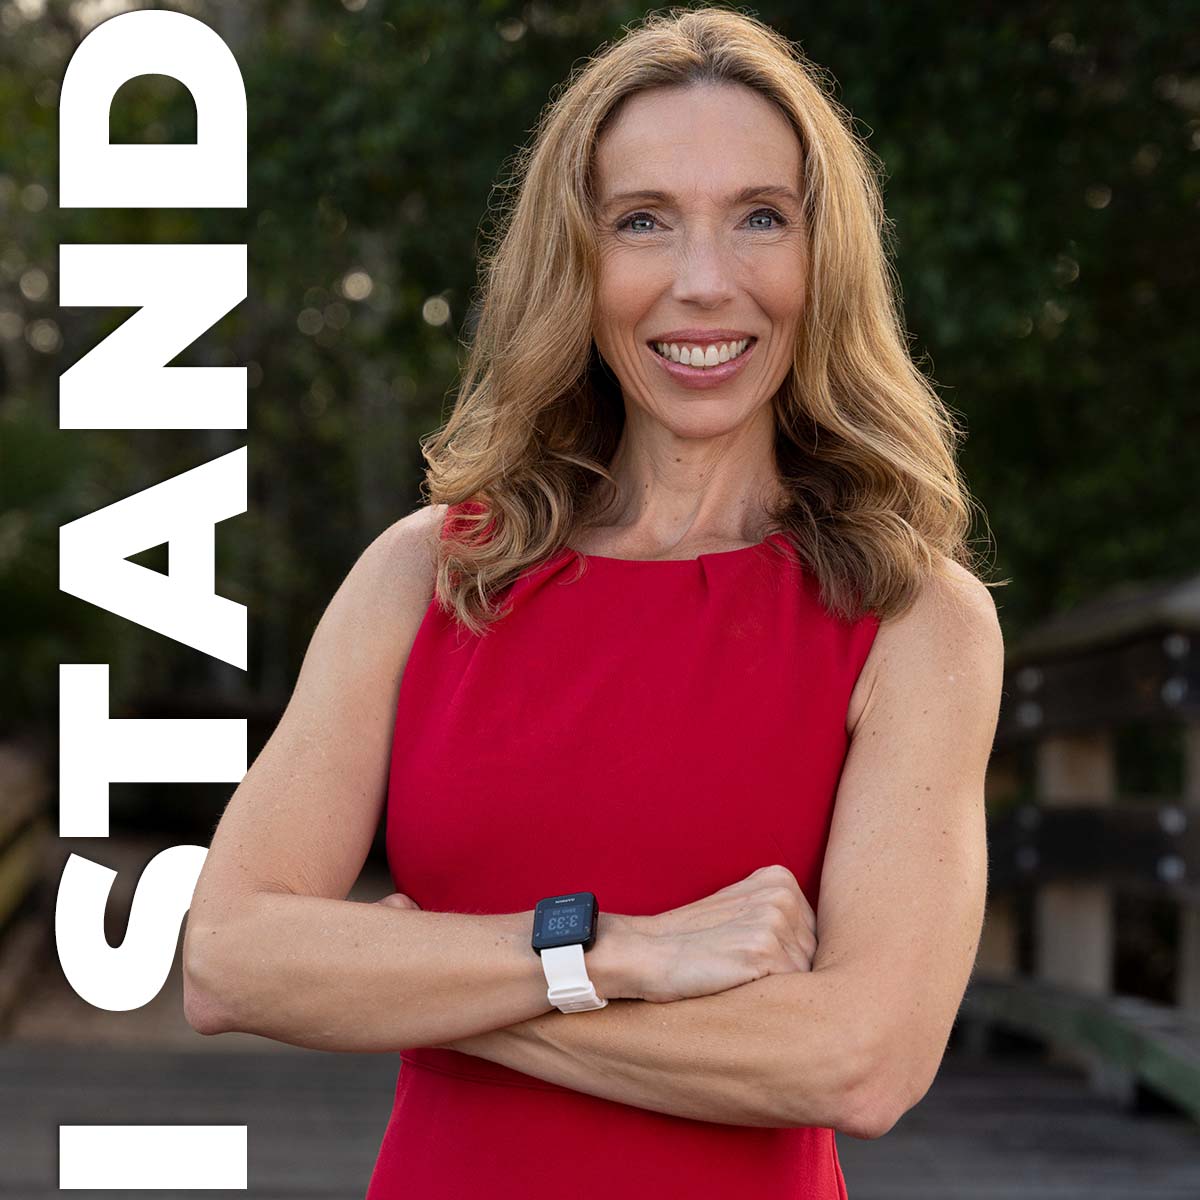 Woman standing with arms folded and the words "I Stand" behind her